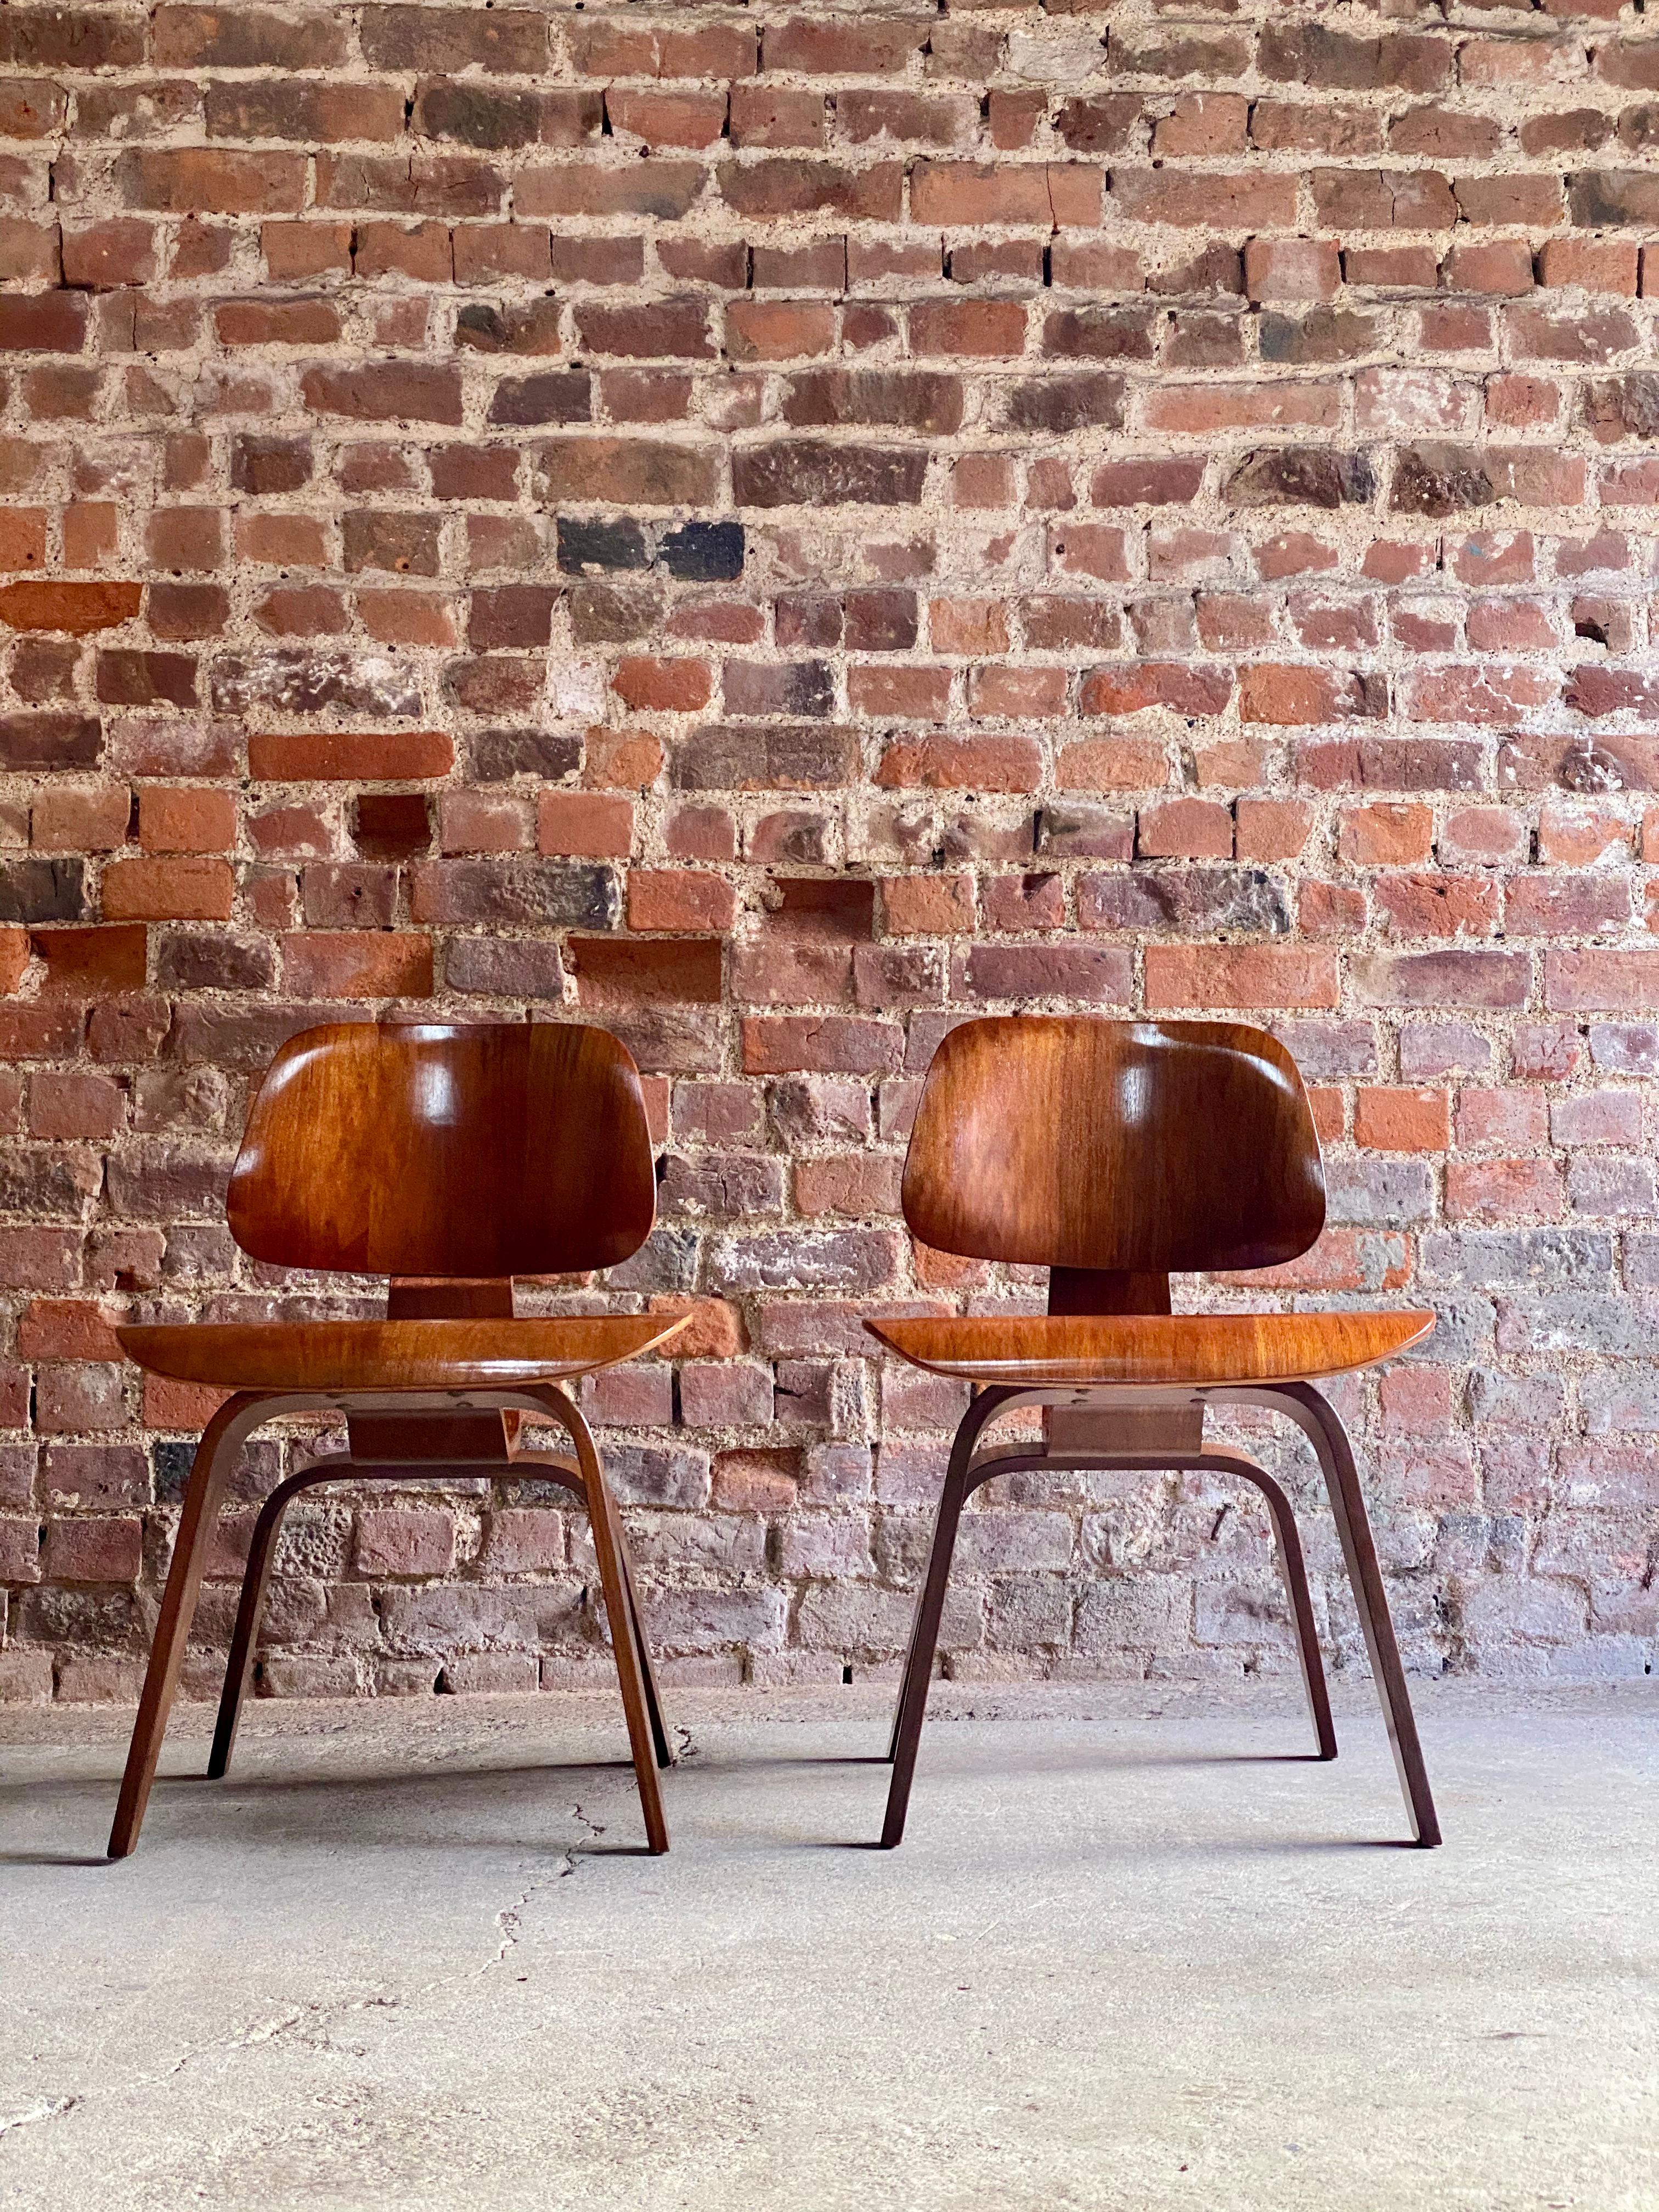 Charles Eames DCW dining chairs by Herman Miller, circa 1950
Rare early pair of DCW chairs, designed by Charles and Ray Eames for Herman Miller in 1946, labelled 'Charles Eames design Herman Miller Zeeland Michigan, circa 1950. Original Herman